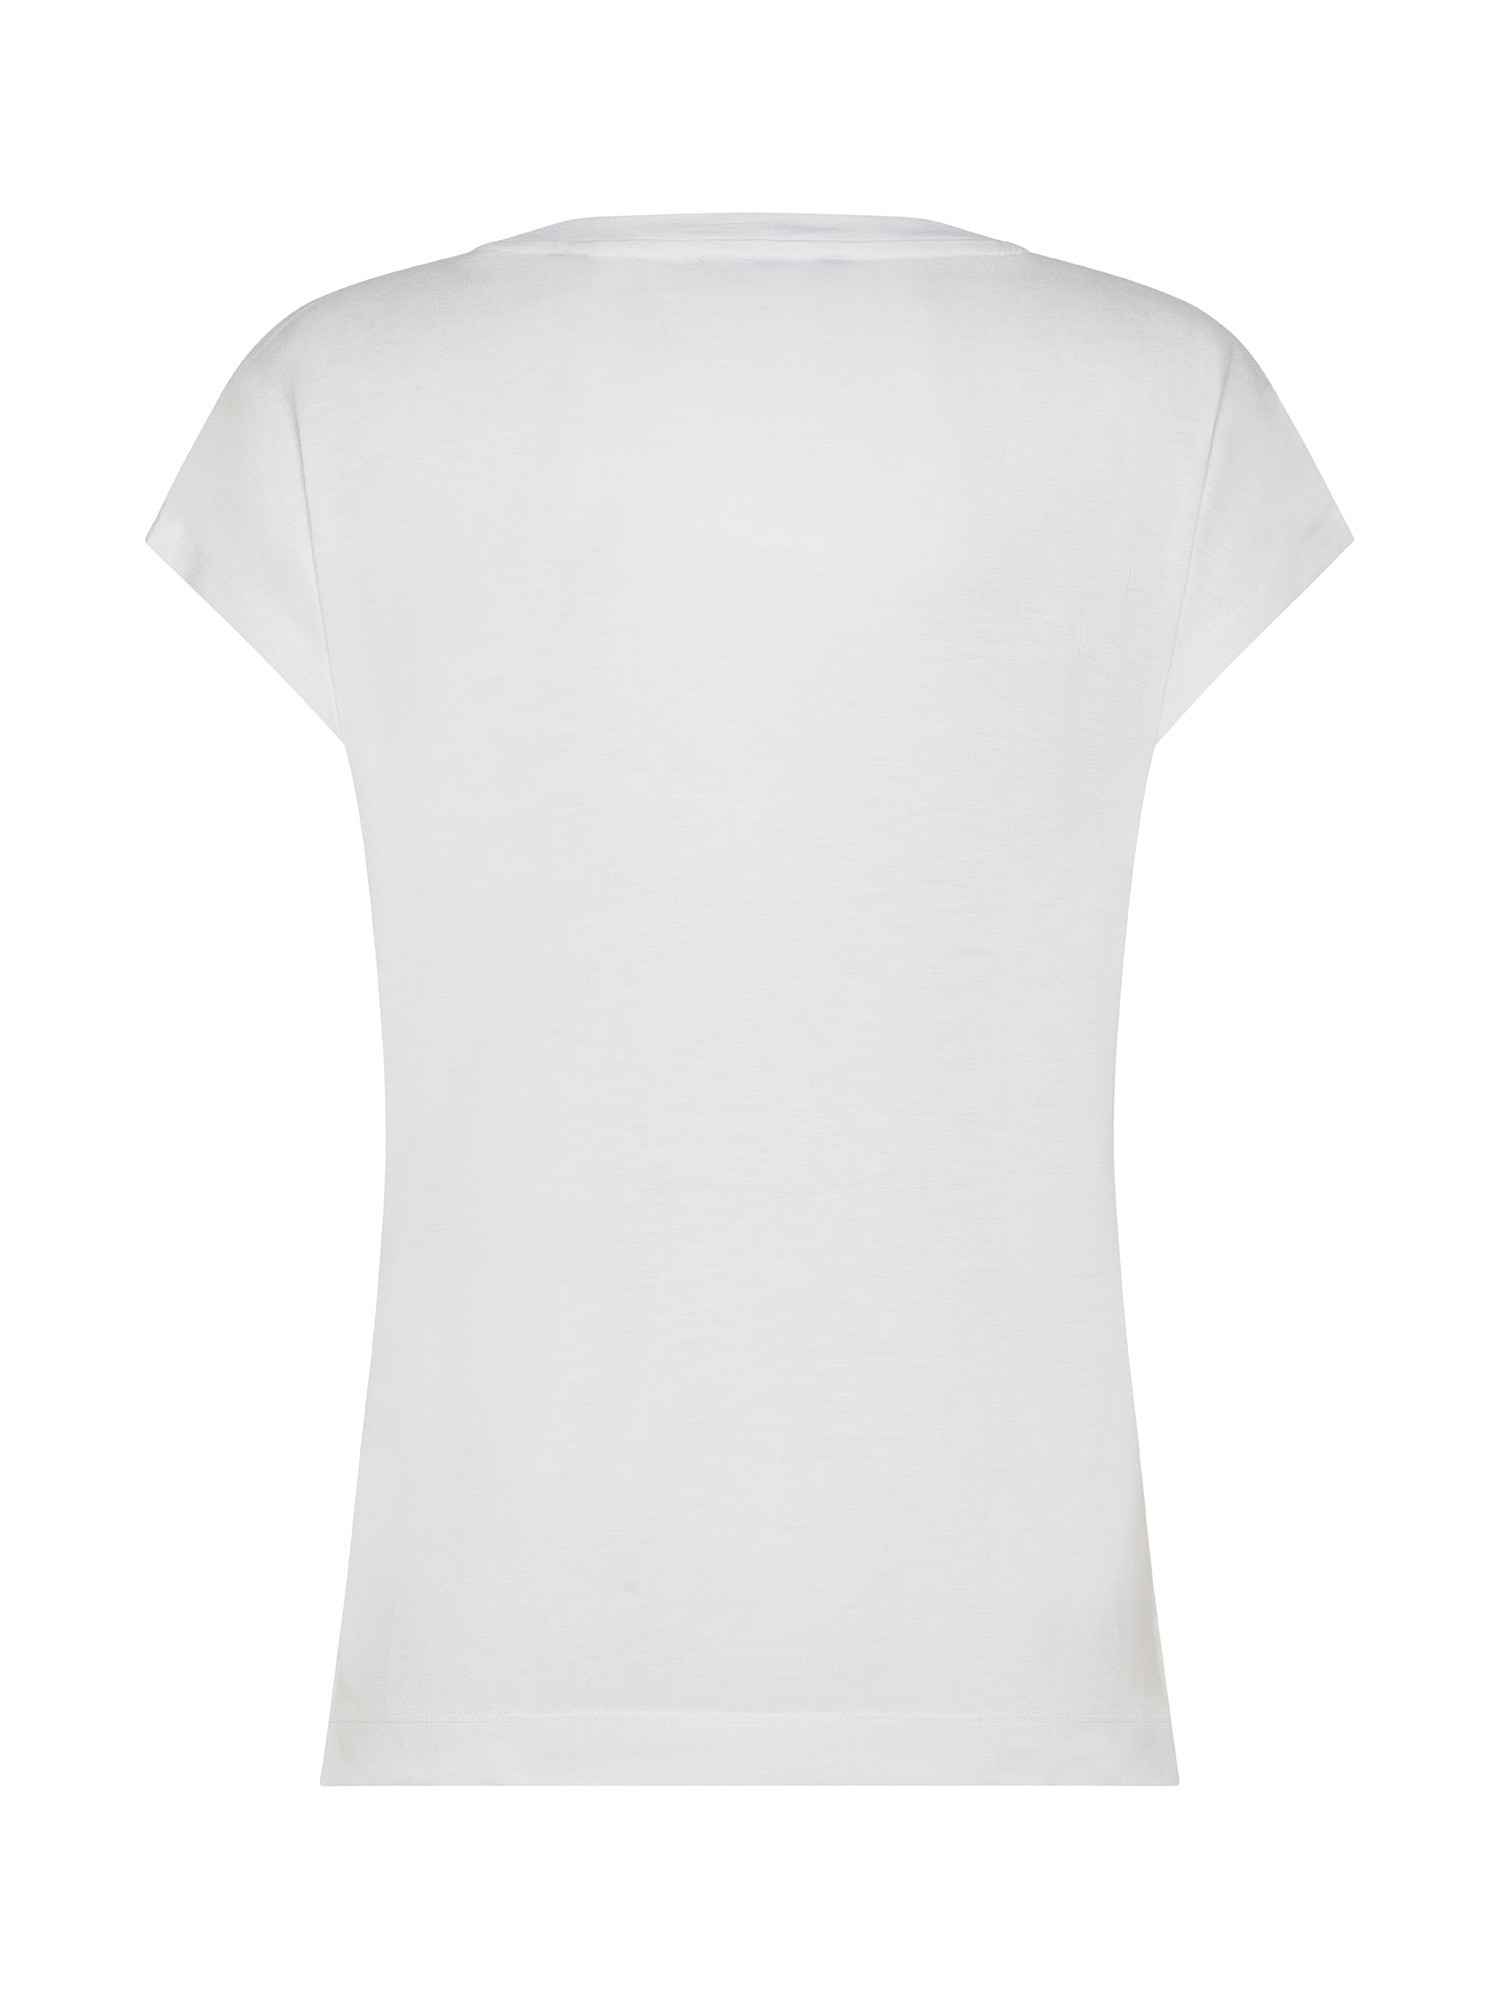 Esprit - T-shirt with sequin lettering, White, large image number 1